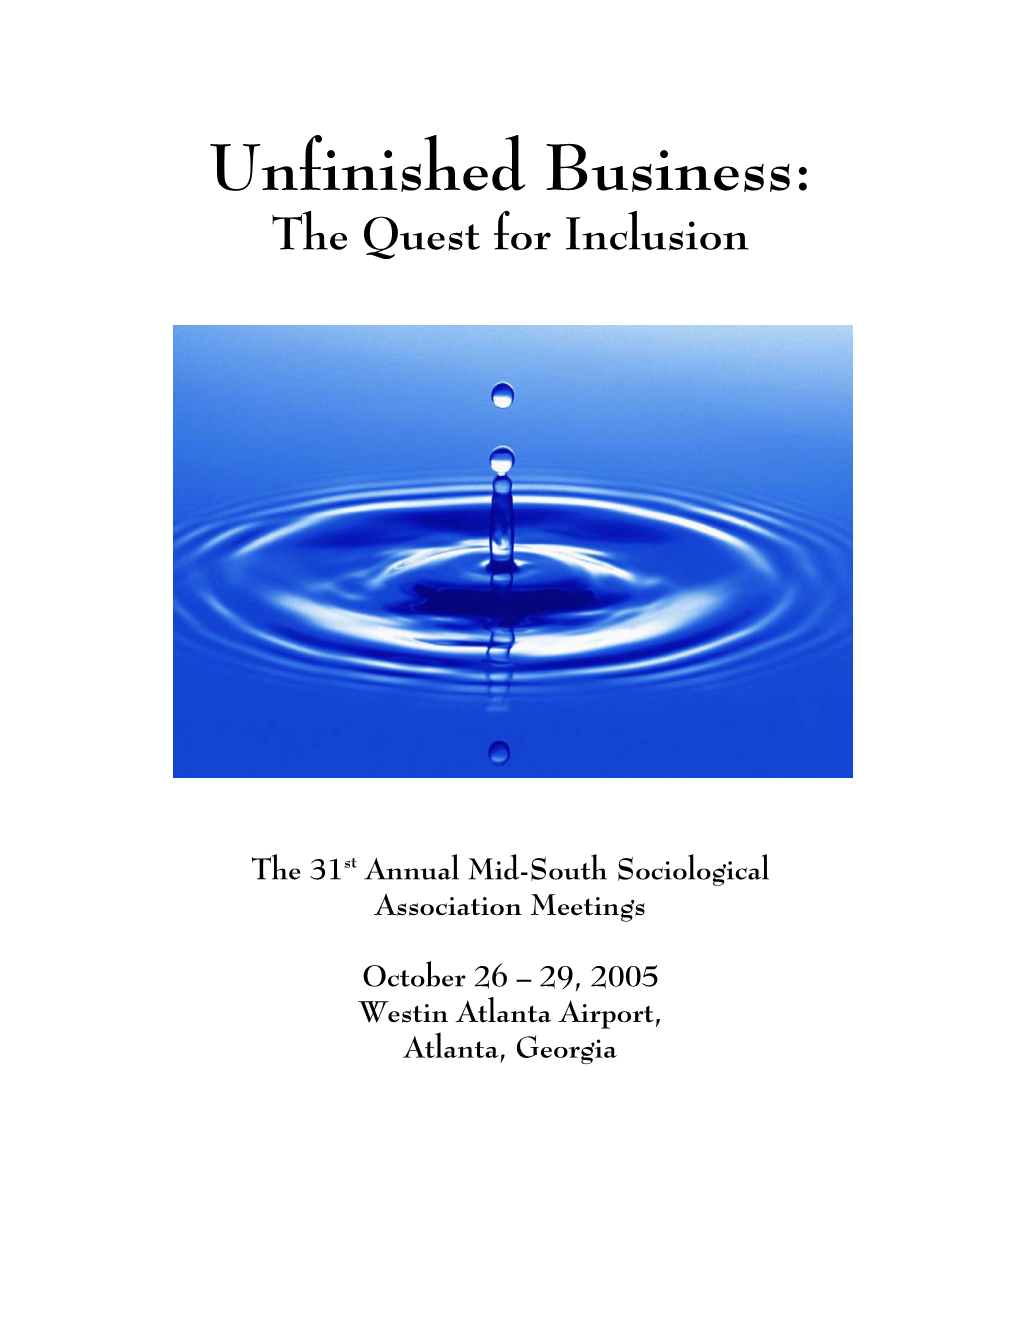 Program for the 2005 31St Annual Meeting